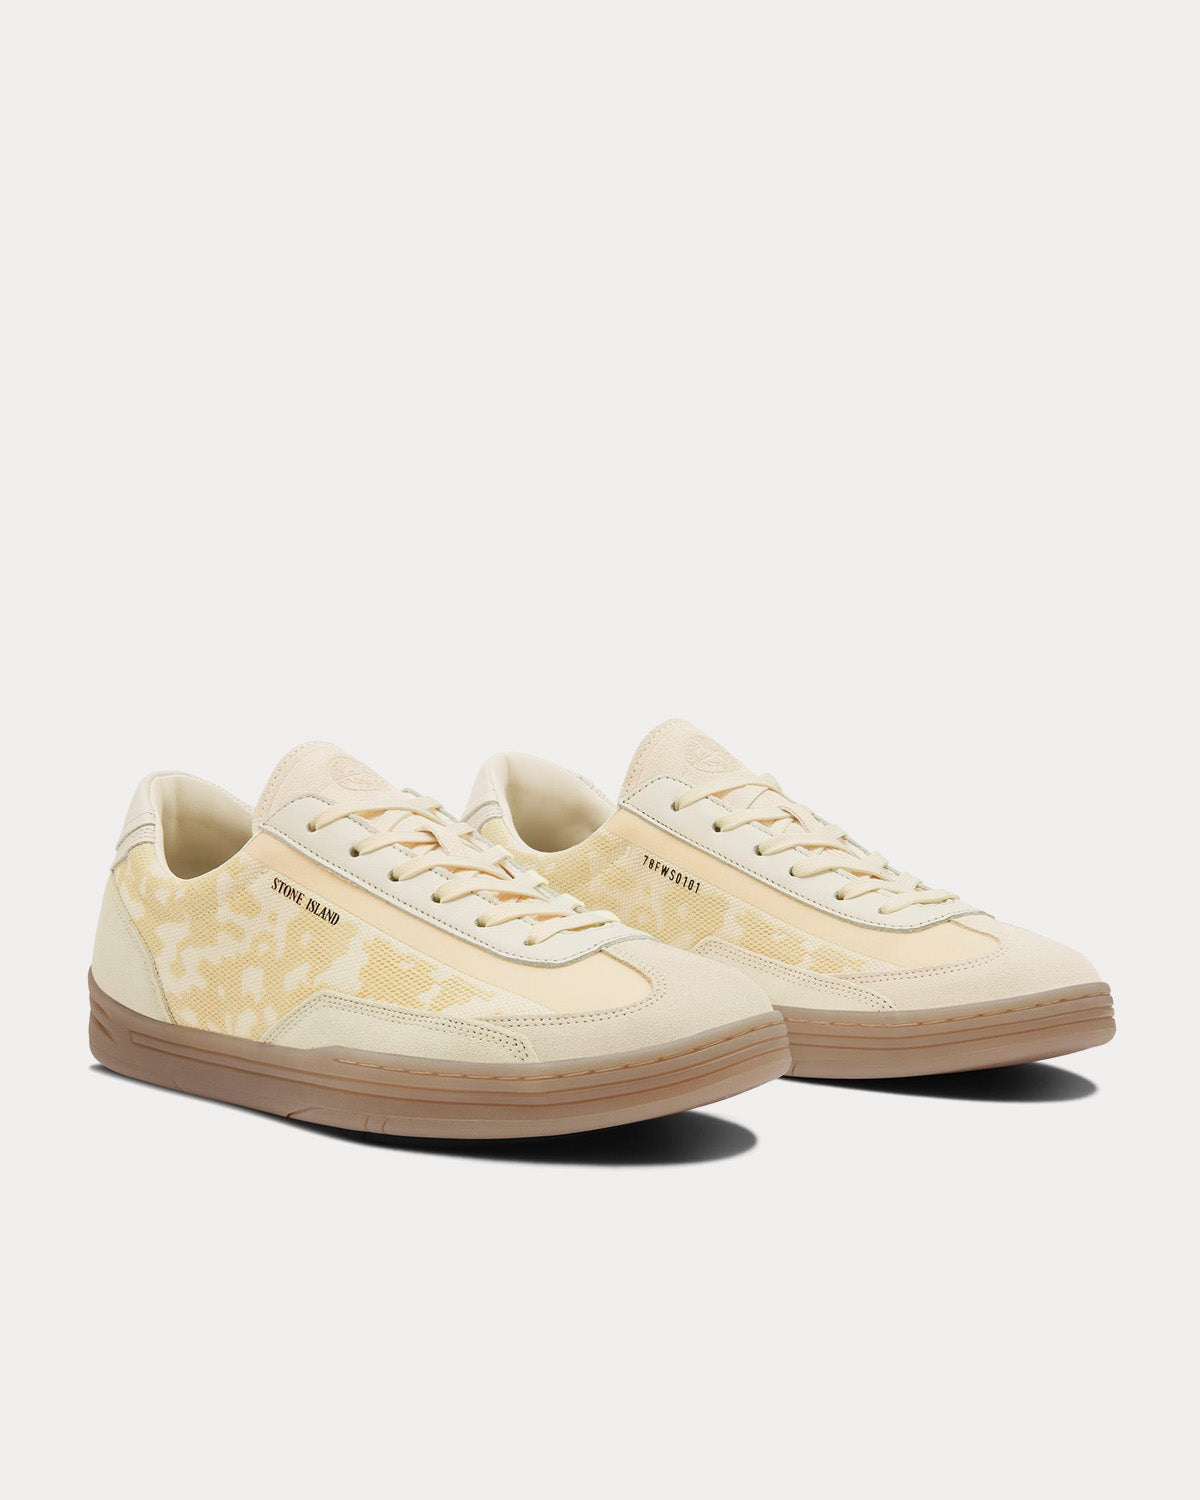 Stone Island - S0101 Ivory Low Top Sneakers